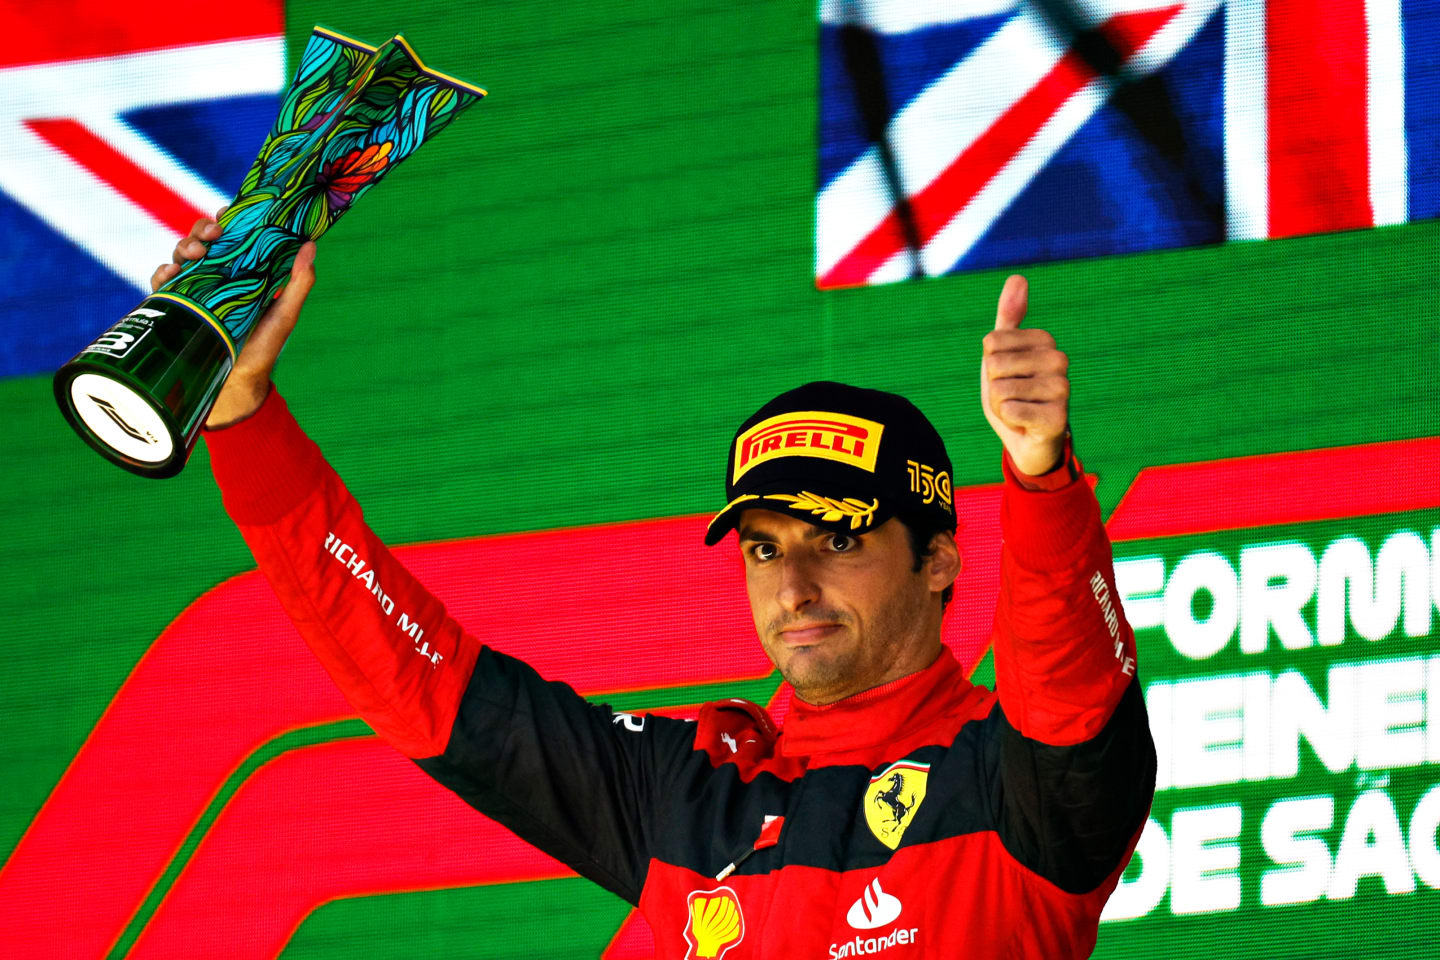 SAO PAULO, BRAZIL - NOVEMBER 13: Third placed Carlos Sainz of Spain and Ferrari celebrates on the podium during the F1 Grand Prix of Brazil at Autodromo Jose Carlos Pace on November 13, 2022 in Sao Paulo, Brazil. (Photo by Jared C. Tilton/Getty Images)